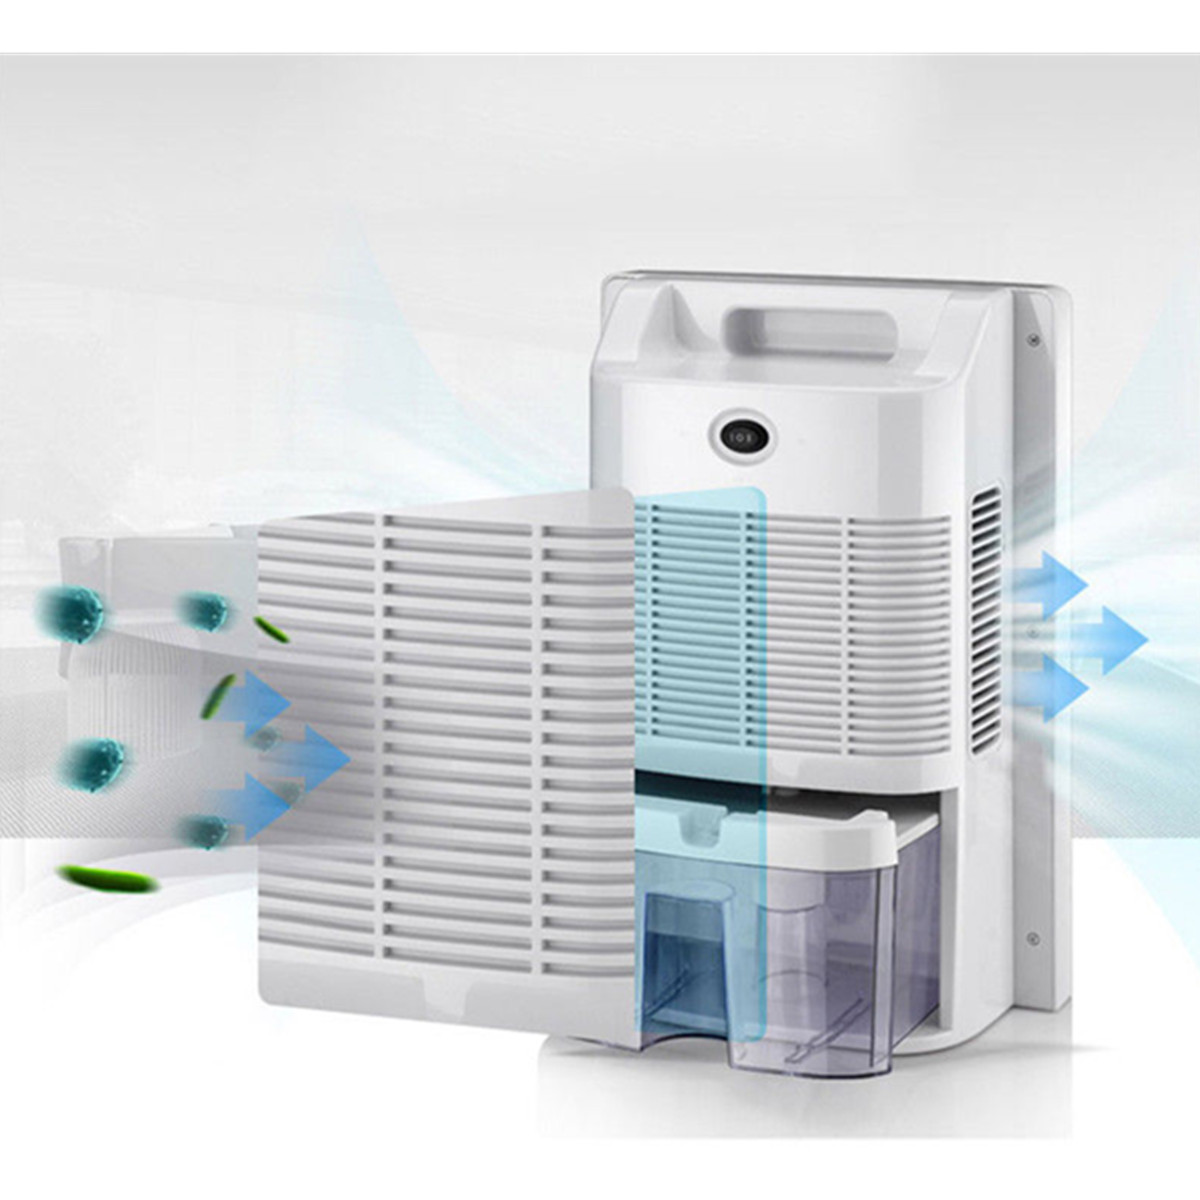 Find 2 2L 220V Portable Home Air Dehumidifier Mute Bedroom Air Purifier Mini Moisture Absorption Dryer for Sale on Gipsybee.com with cryptocurrencies